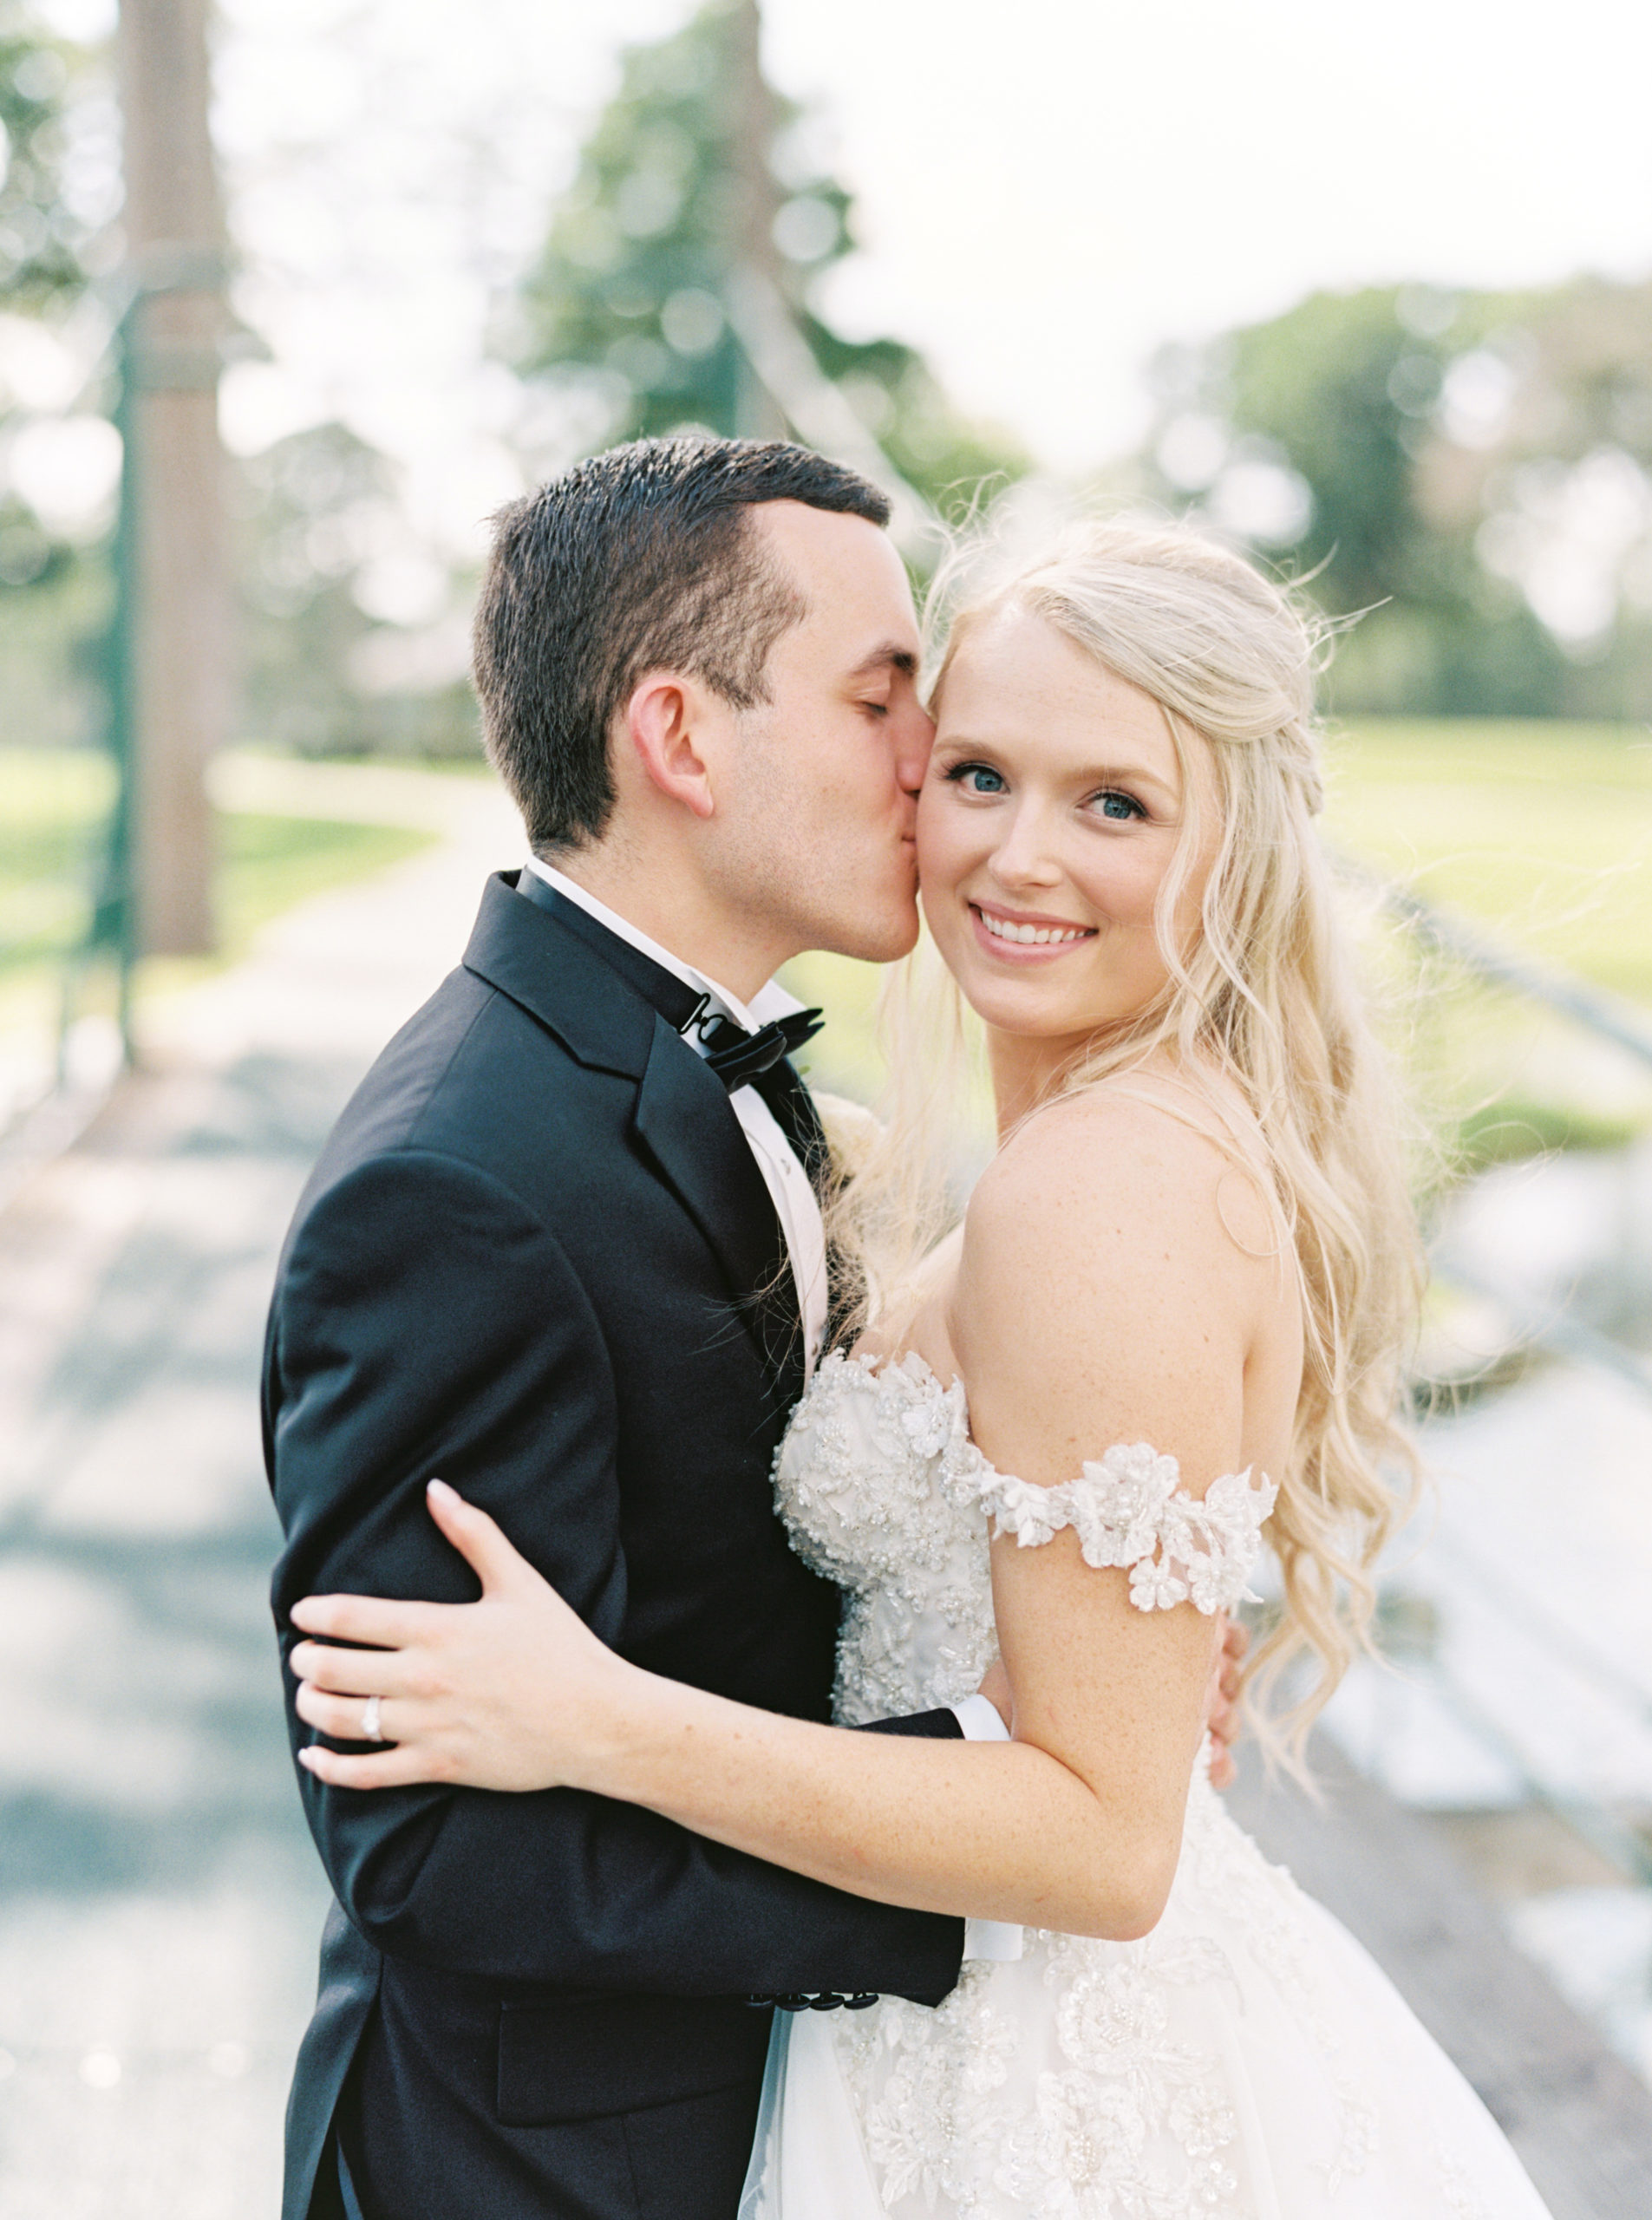 Bride looks at the camera enchantingly as the groom gives her a kiss on the cheek during their wedding shoot with Mackenzie Reiter